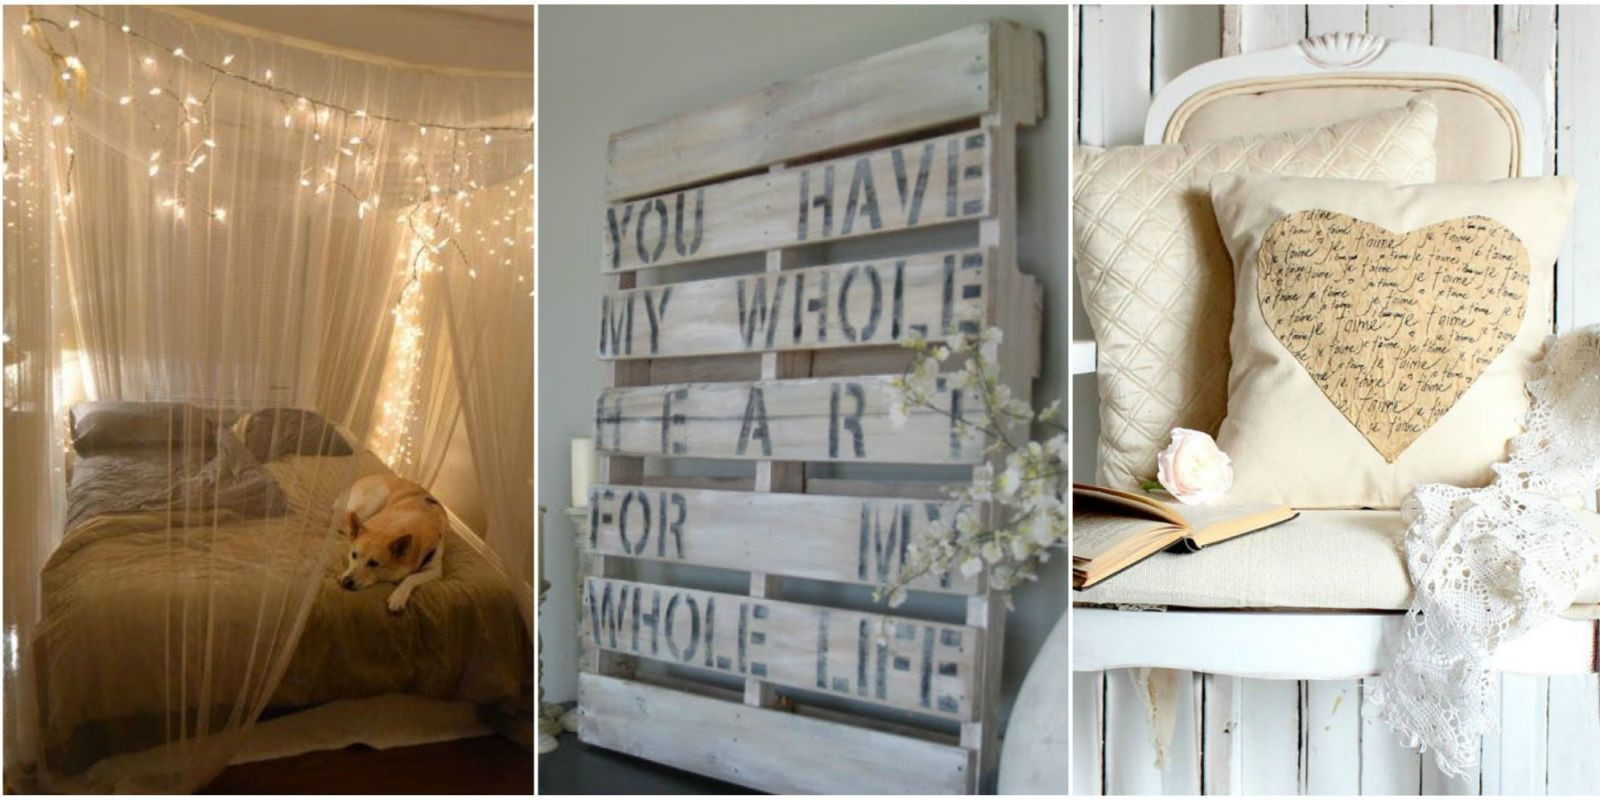 DIY Decorations For Bedroom
 21 DIY Romantic Bedroom Decorating Ideas Country Living